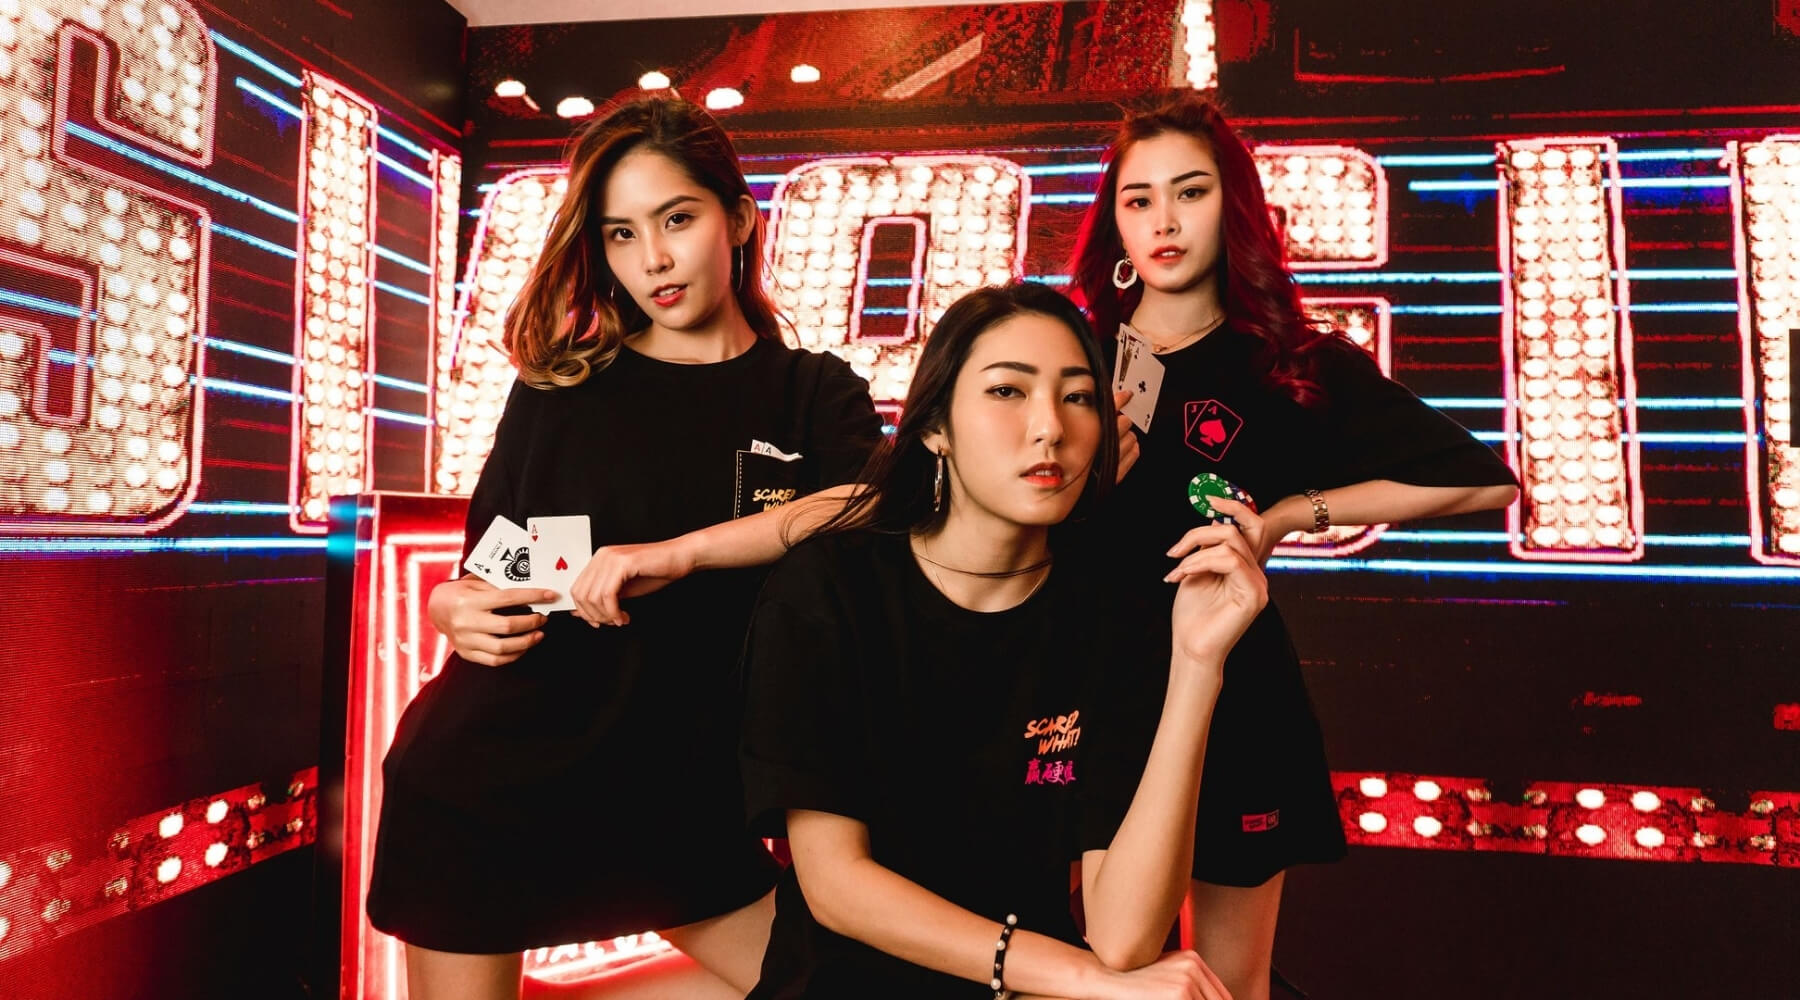 bloomthis-sapot-lokal-9-local-malaysian-brands-we-love-2021-06-scared-what-malaysian-streetwear